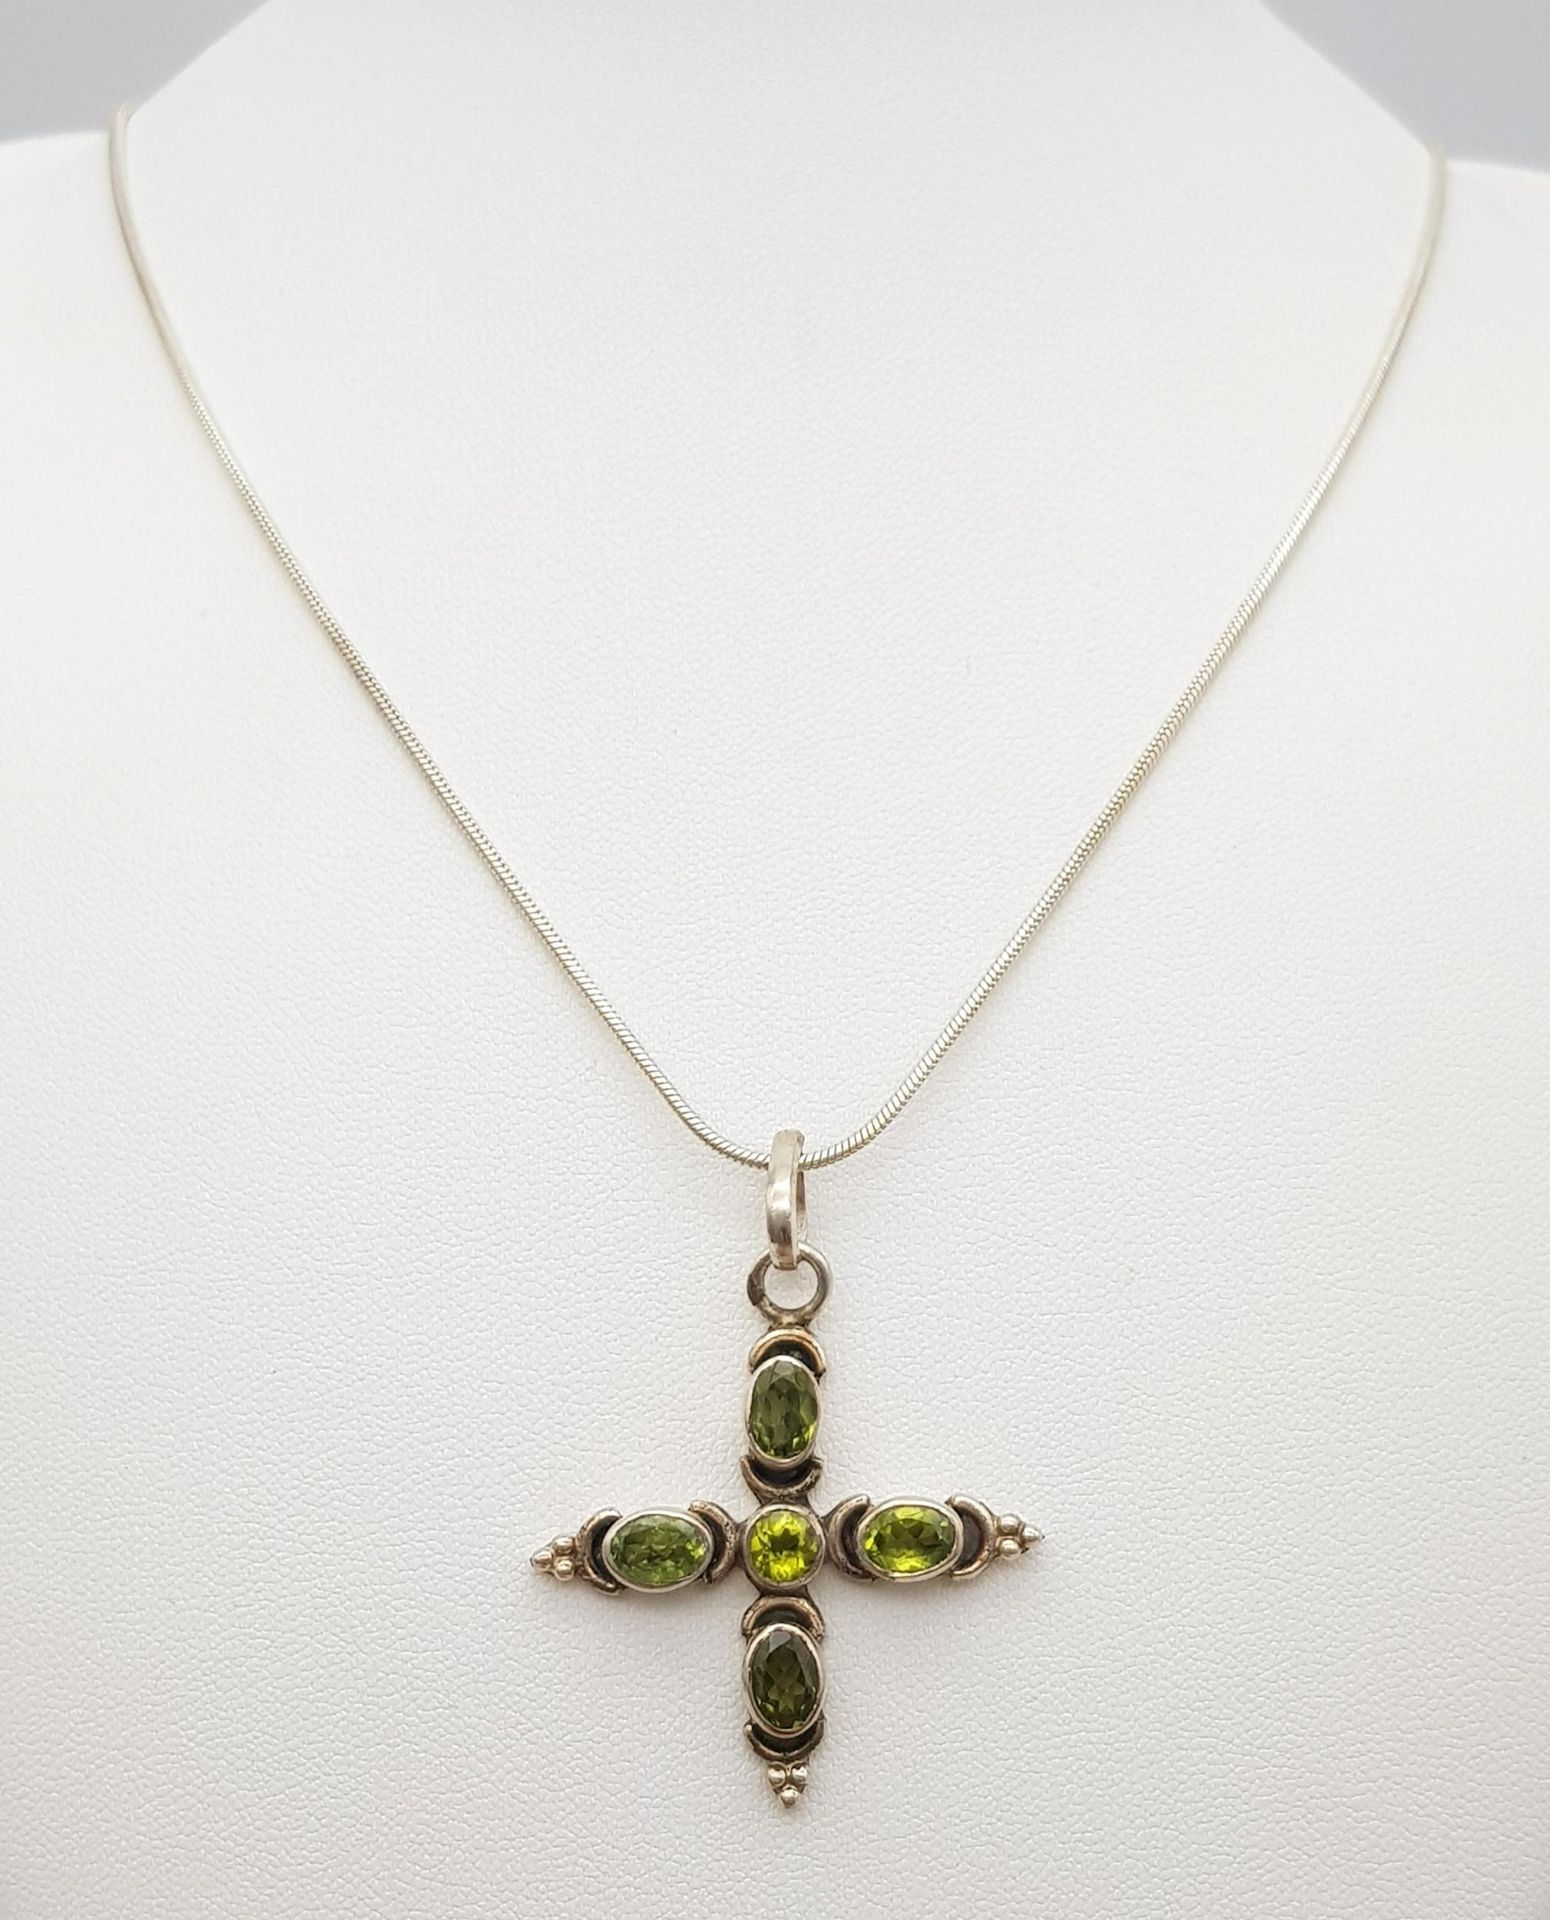 A Vintage Sterling Silver Peridot Set Cross Necklace. 46cm Sterling Silver Rope Chain. Pendant